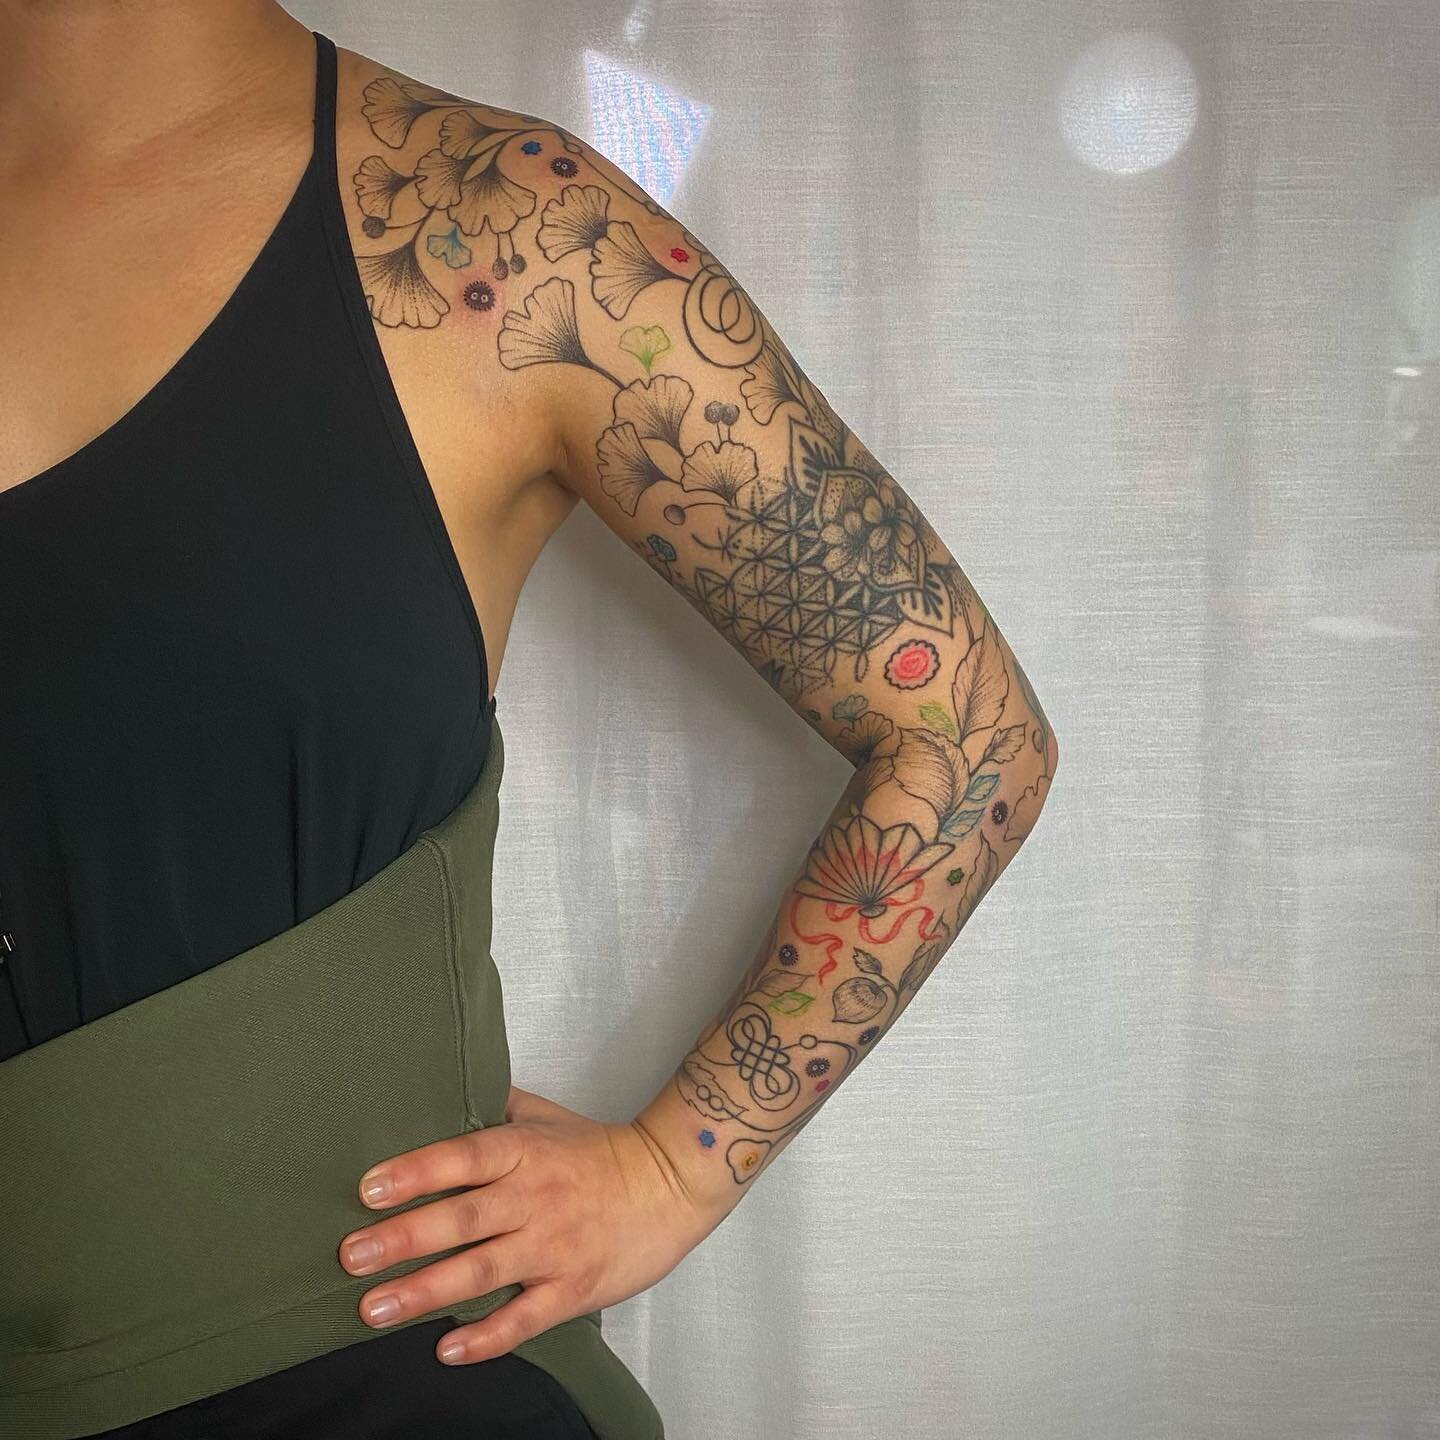 IG photos will never do a sleeve justice, but behold! A mostly healed chaos filler sleeve on one of my sweetest clients that I finished literally months ago and am now just getting around to sharing :)

Half freehand, half stenciled - swipe to end to